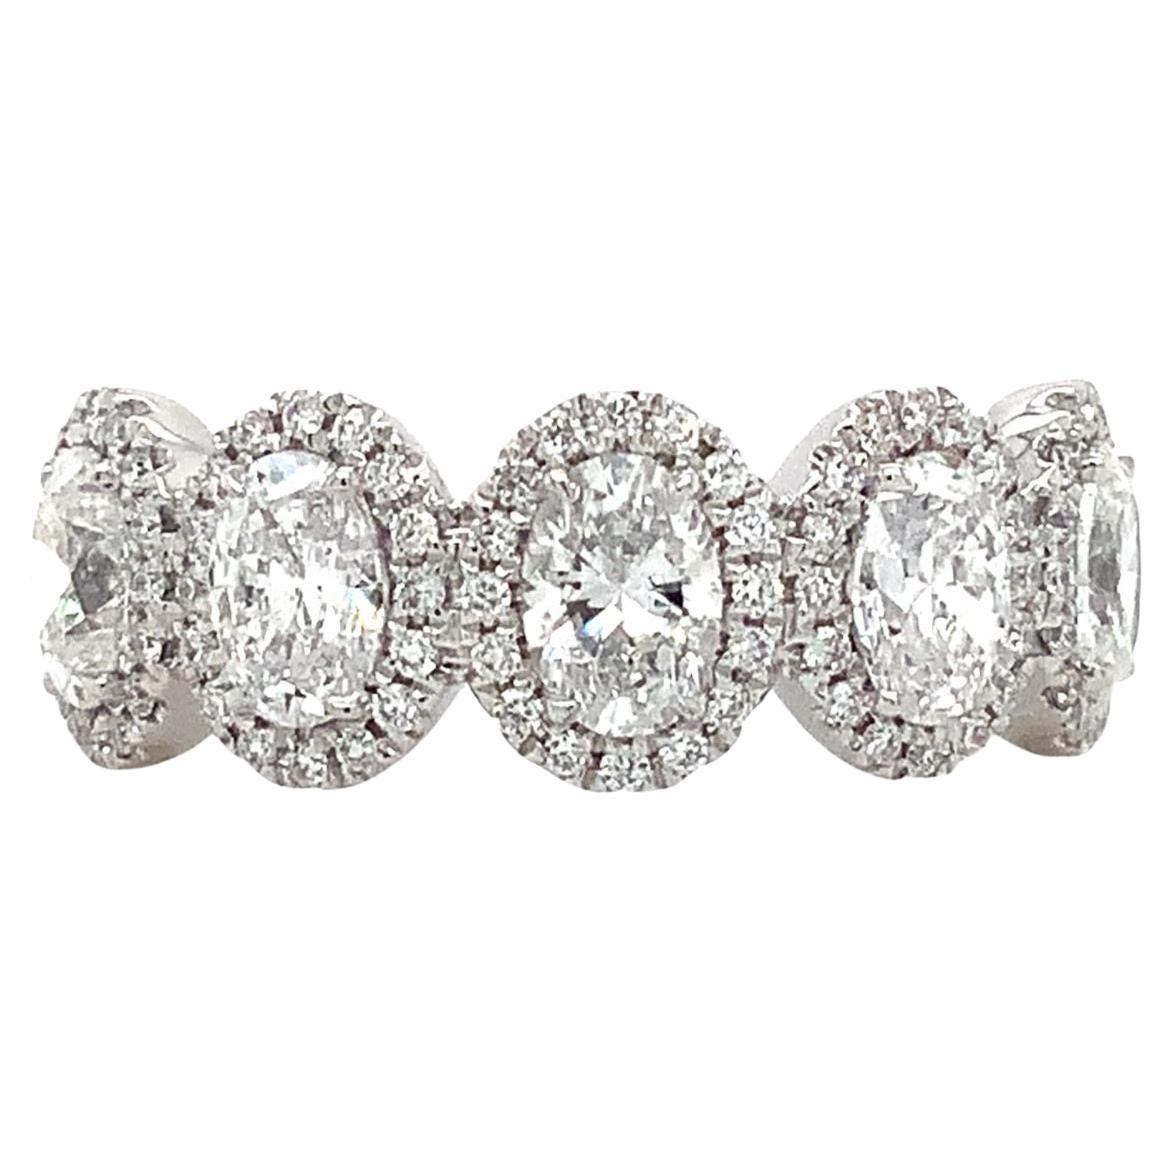 Roman + Jules 5 Stone Oval Shape Diamond Halo Band Set in Platinum 1.77cts T.W For Sale